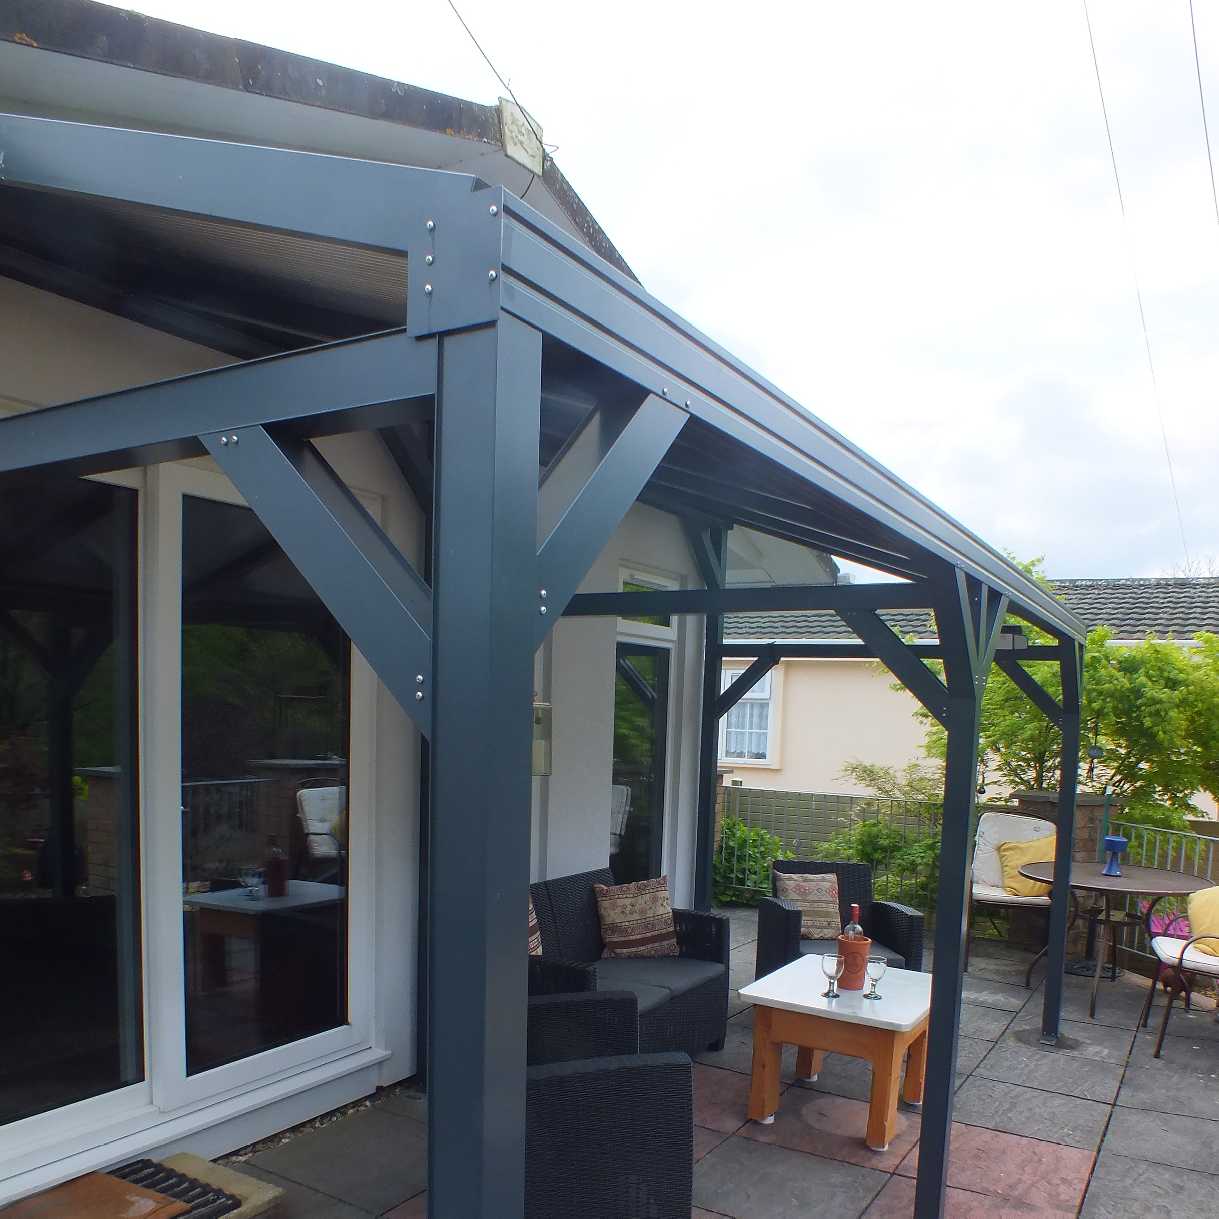 Affordable Omega Smart Free-Standing, Anthracite Grey MonoPitch Roof Canopy with 16mm Polycarbonate Glazing - 7.4m (W) x 2.5m (P), (8) Supporting Posts